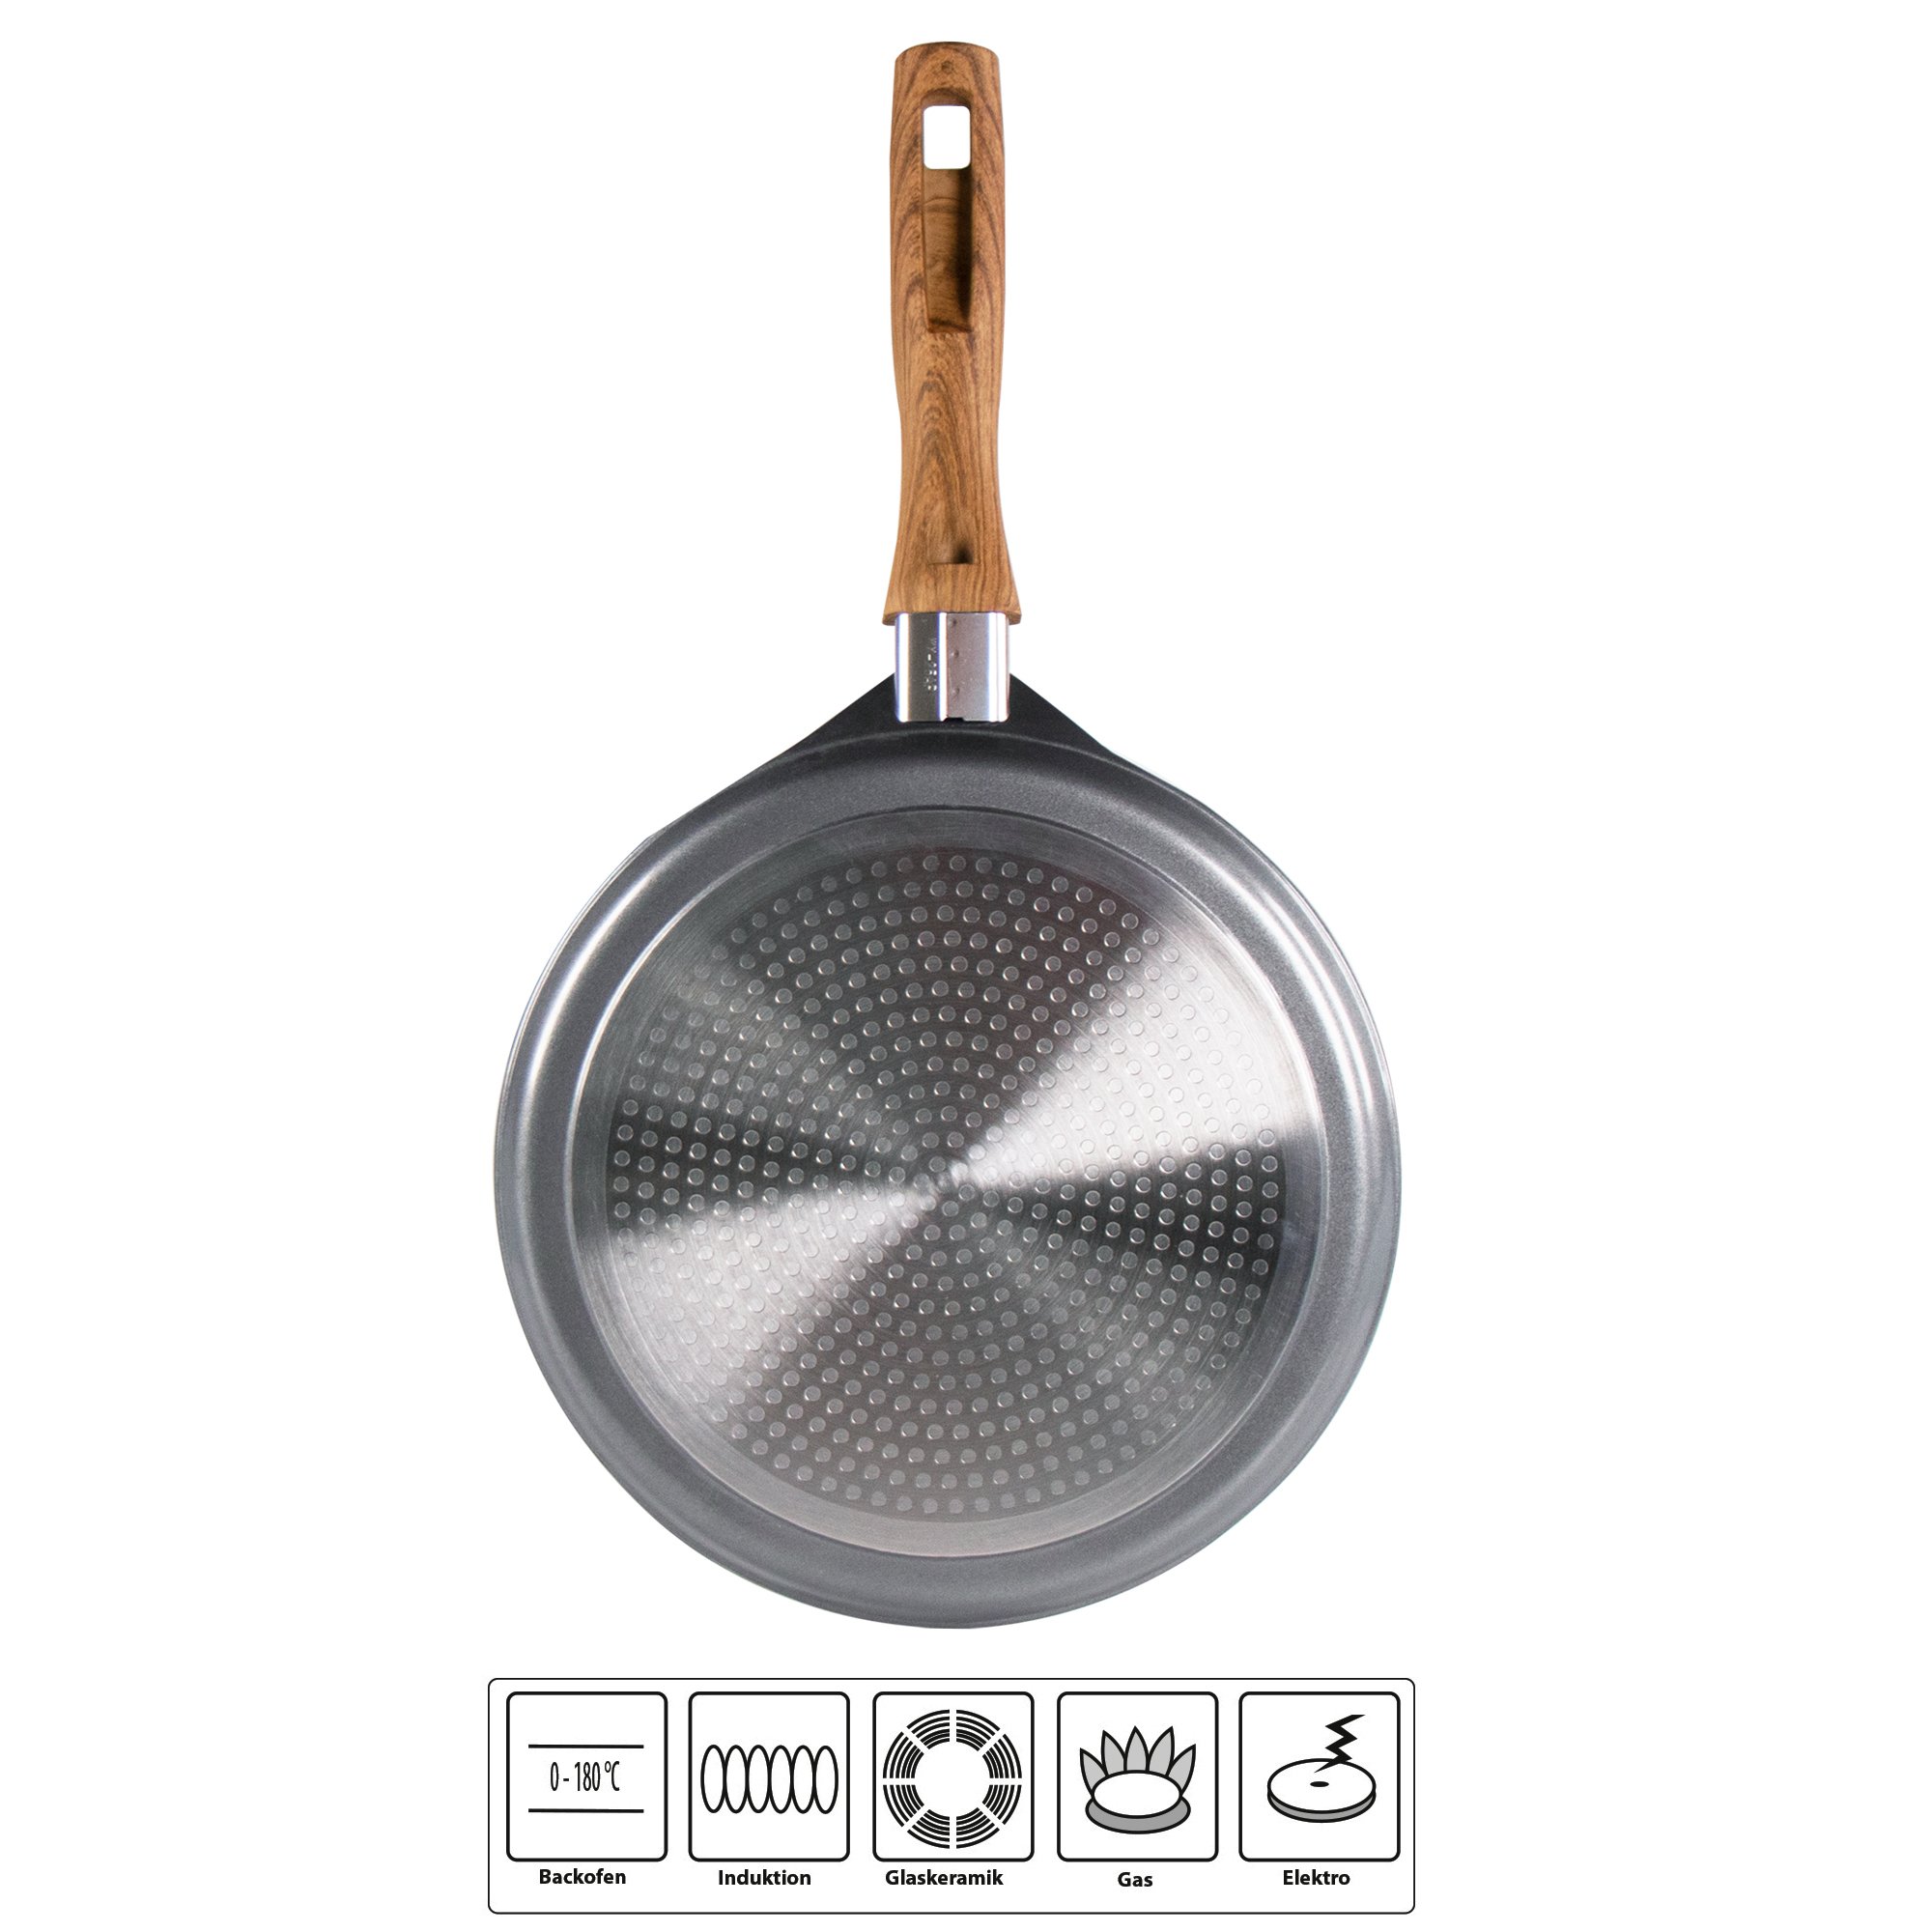 STONELINE® Crepe Pan 25 cm, with Batter Spreader, Flat Non-Stick Pan | Back to Nature